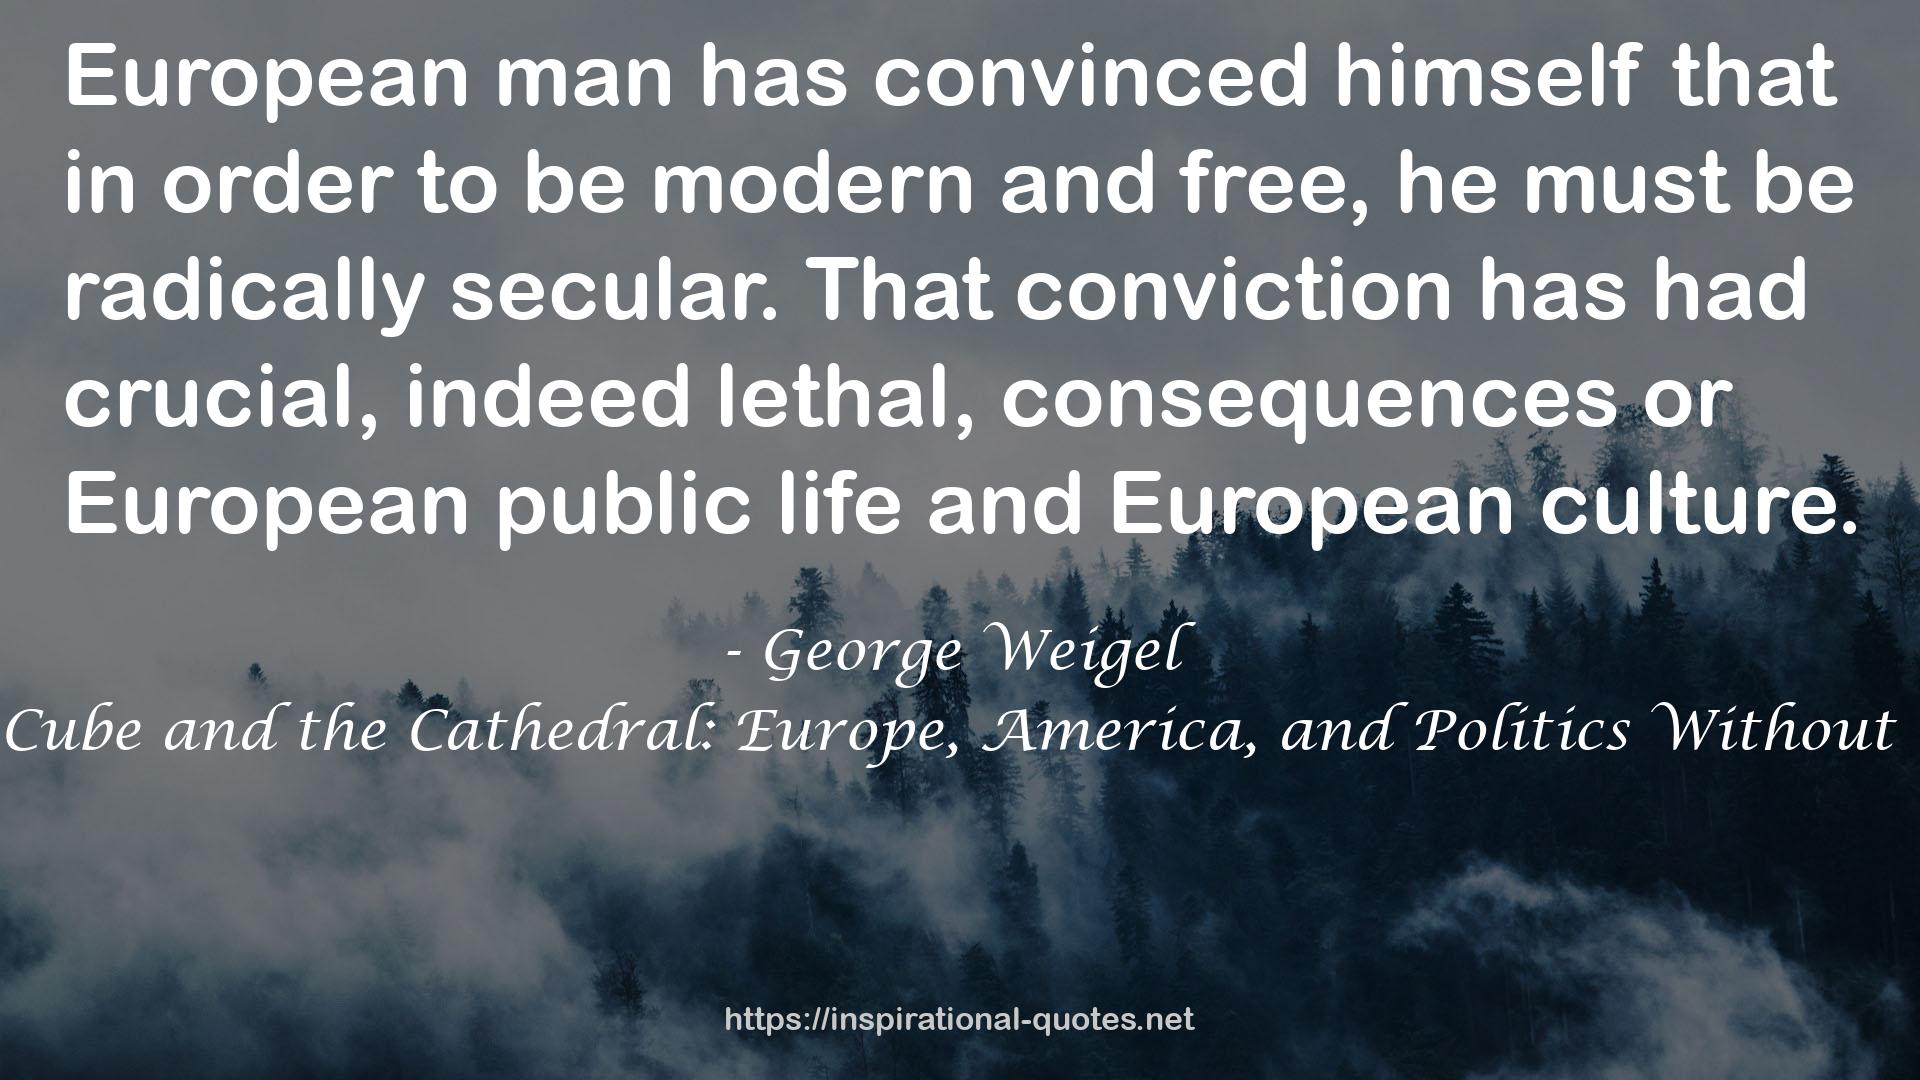 The Cube and the Cathedral: Europe, America, and Politics Without God QUOTES